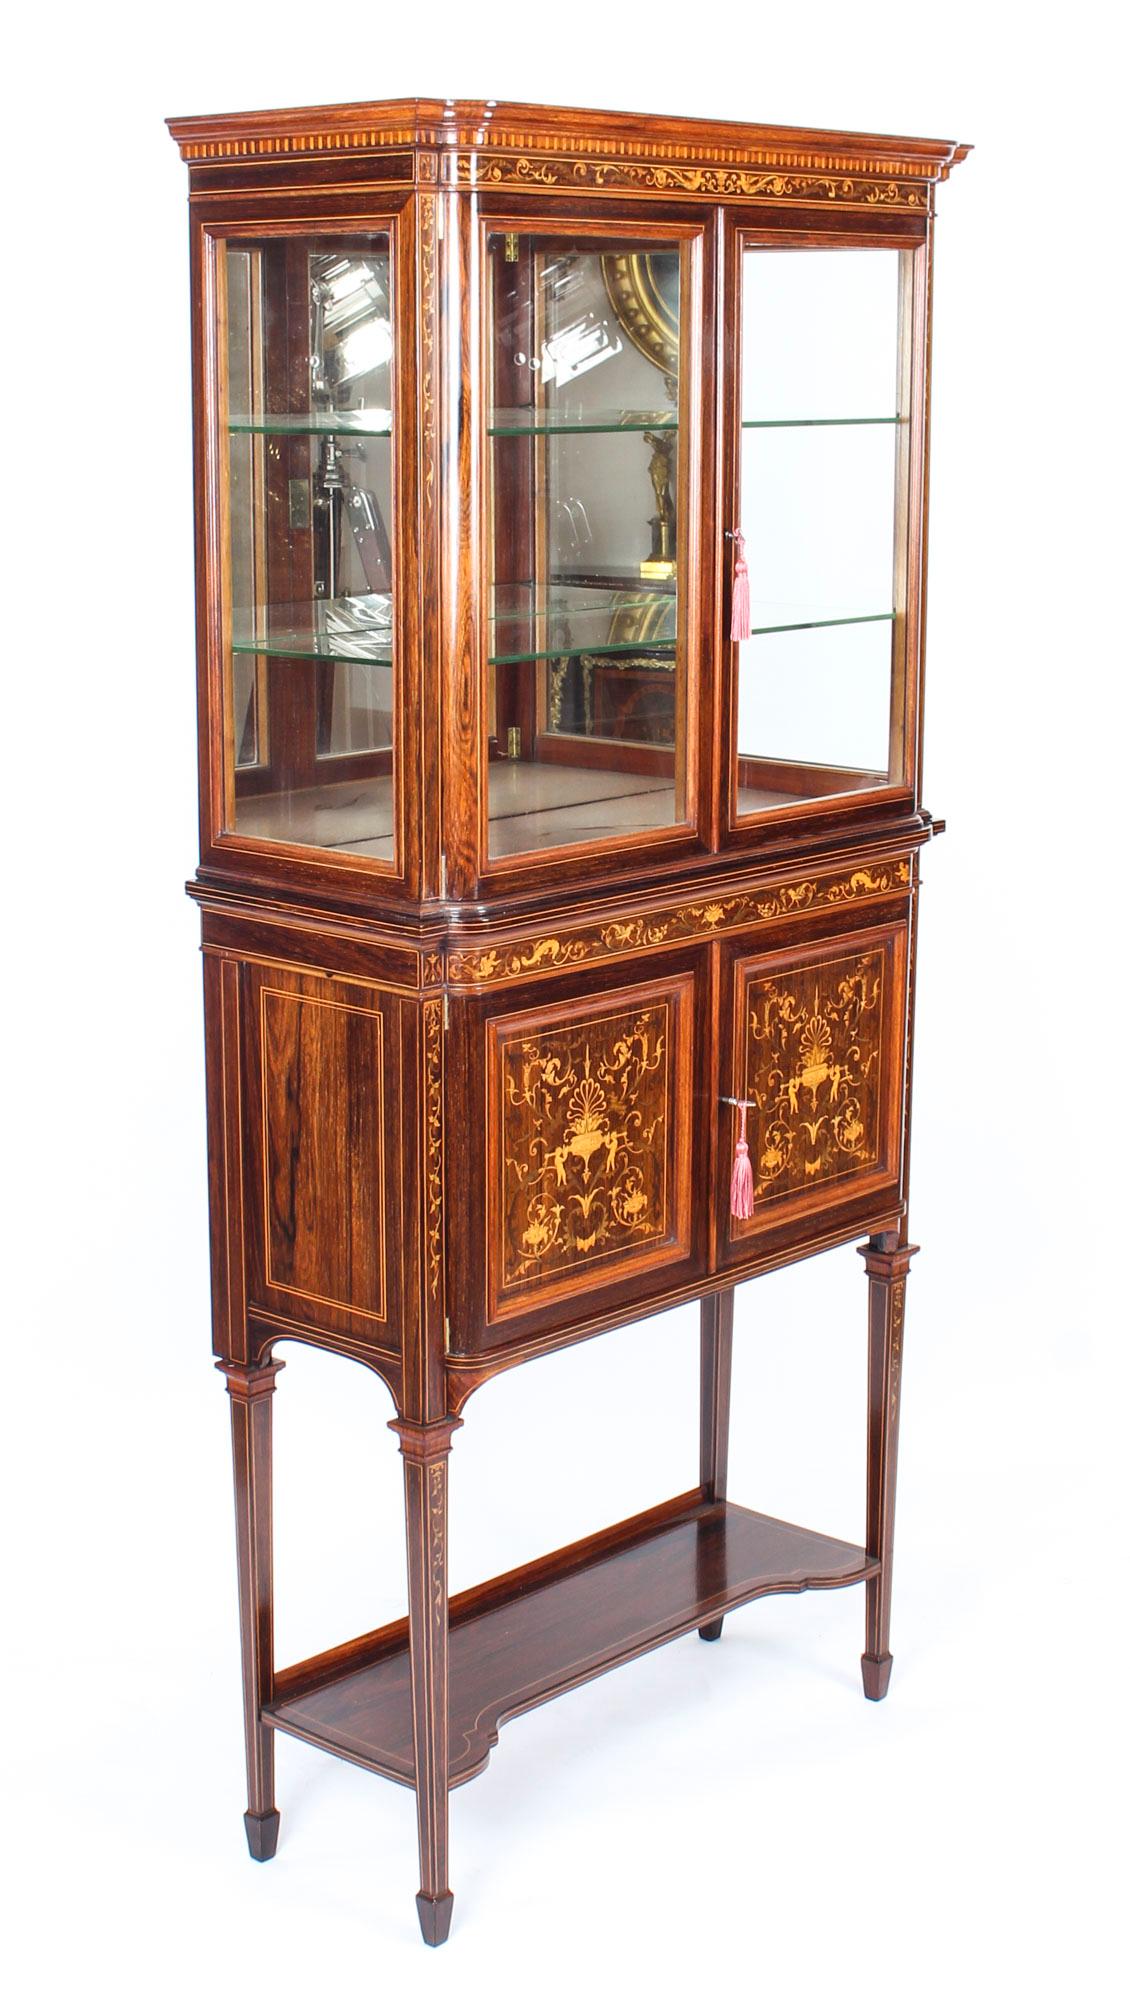 This is a truly magnificent antique Edwardian Goncalo Alves and marquetry inlaid upright display cabinet by Edwards & Roberts, circa 1890 in date.

The cabinet is bordered with boxwood lines and decorated with scrolling foliage, cherubs, mythical